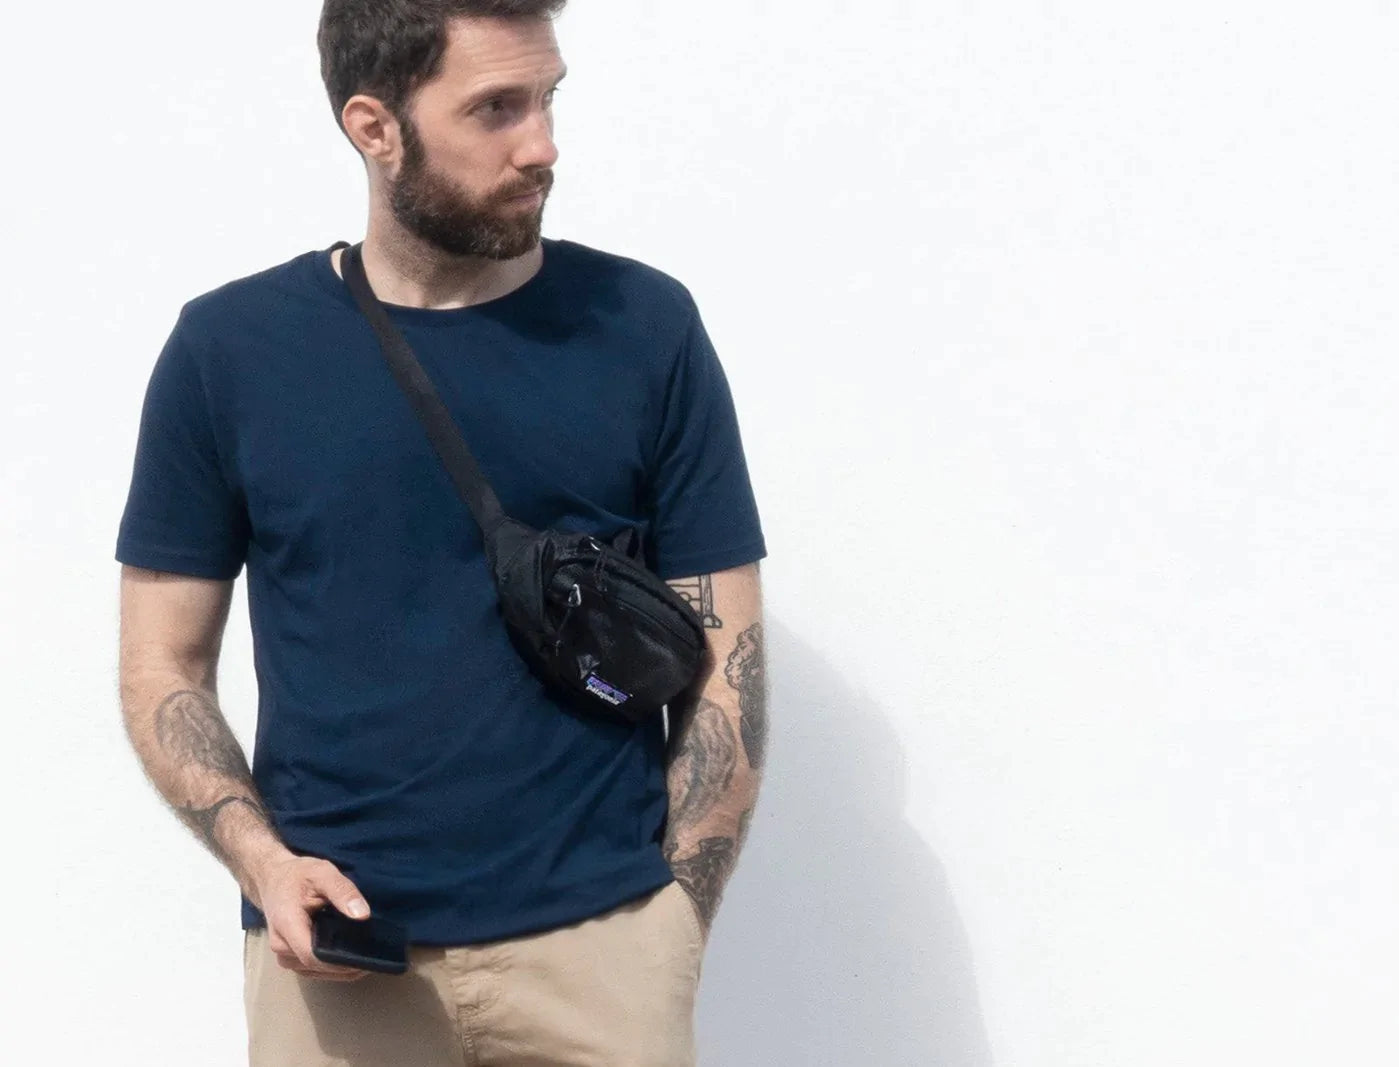 Affordable ethical & organic T-shirts